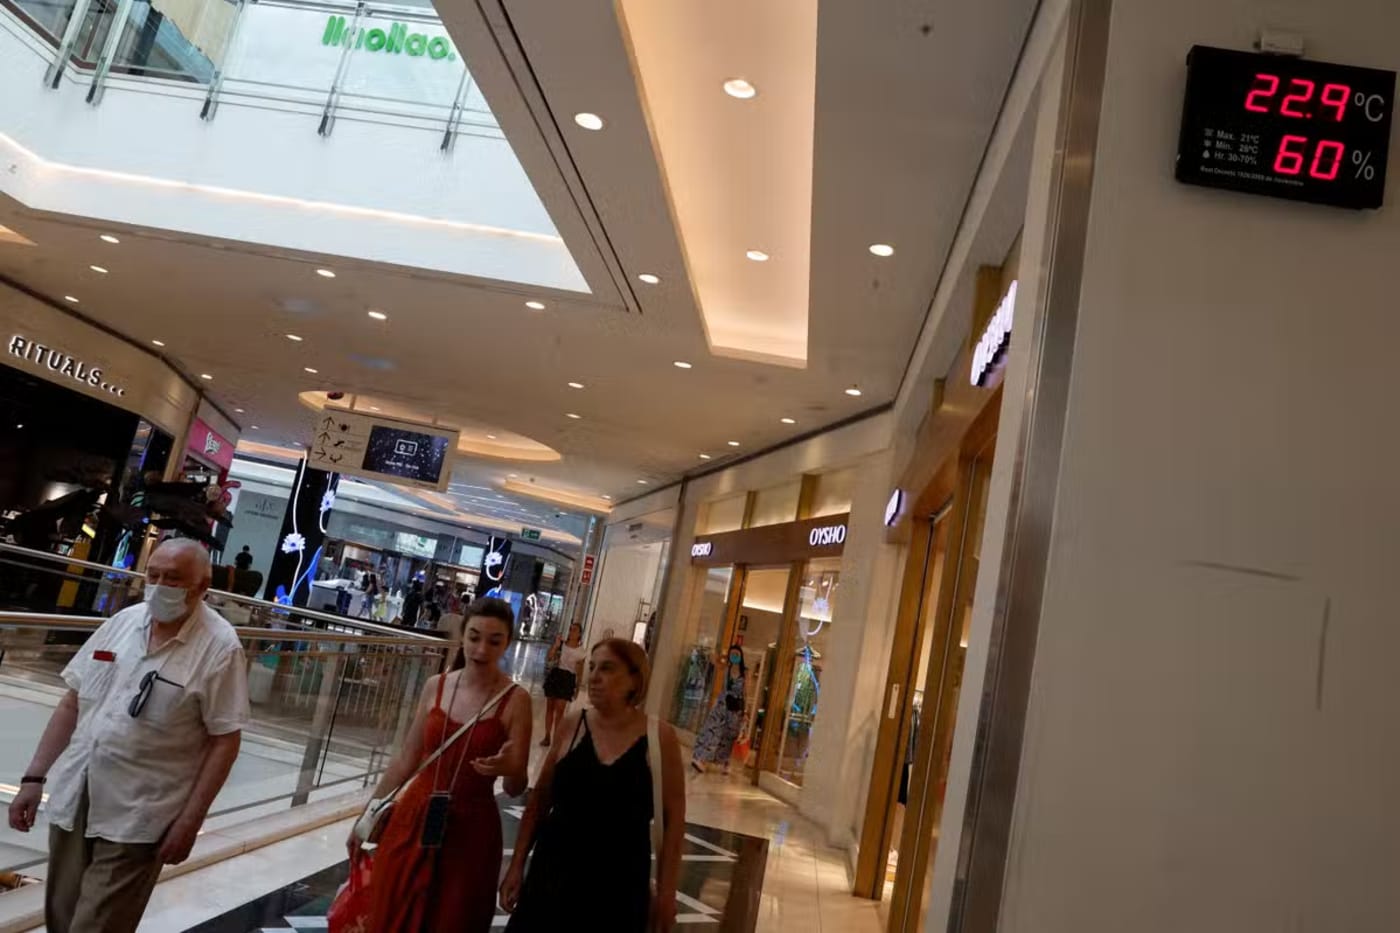 spain shopping centre air conditioning article lead